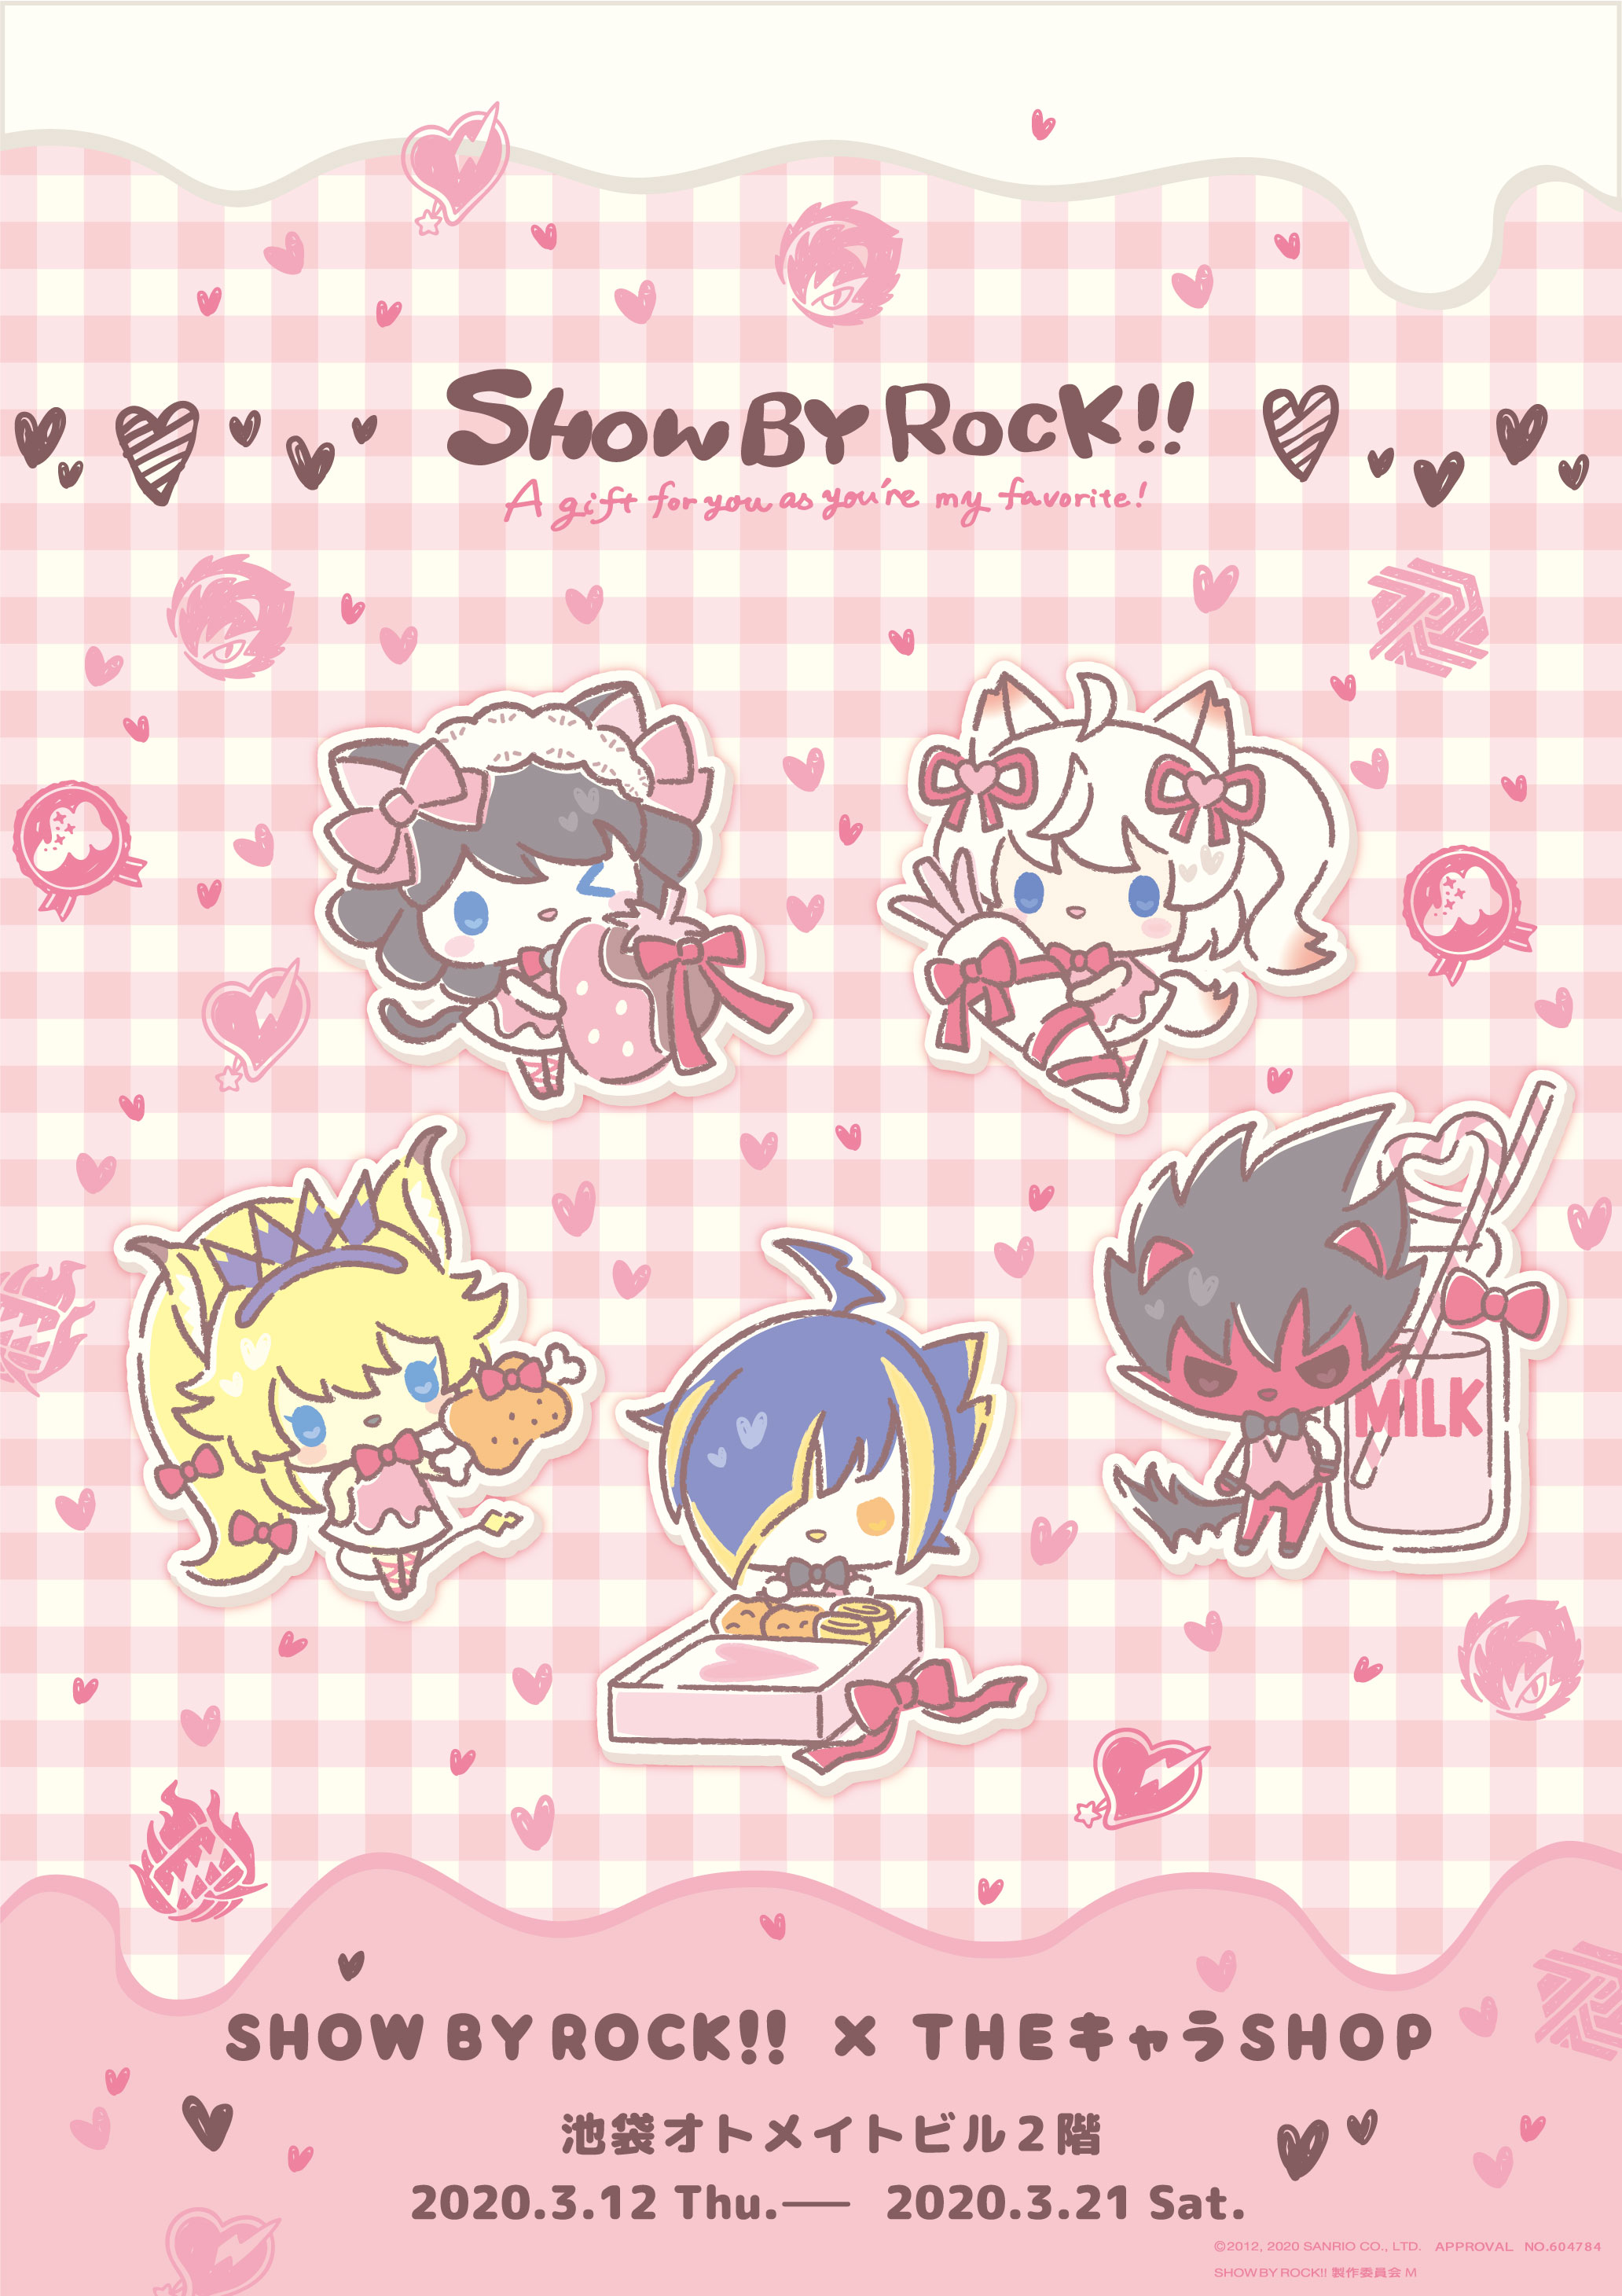 Show By Rock A Gift For You As You Re My Favorite Theキャラshopが池袋オトメイトビルにてオープン決定 Theキャラ イベント情報